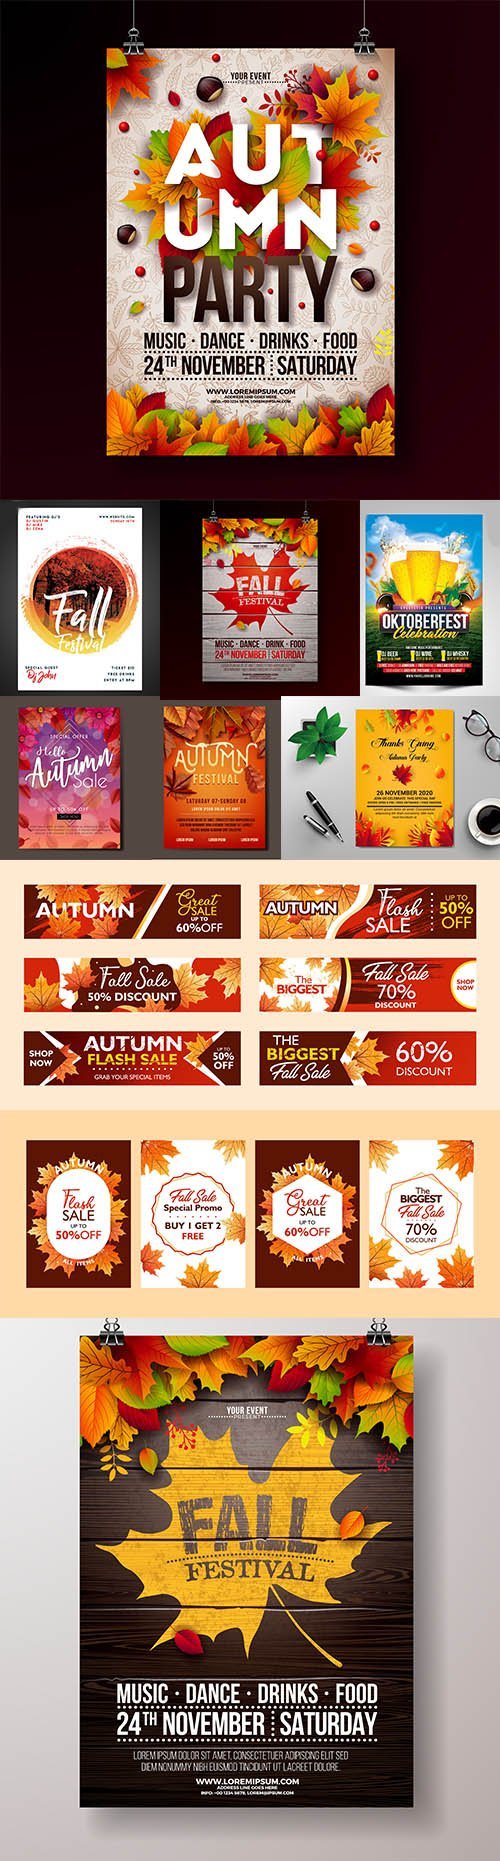 Set of Autumn Party Flyers and Banner EPS and PSD Template